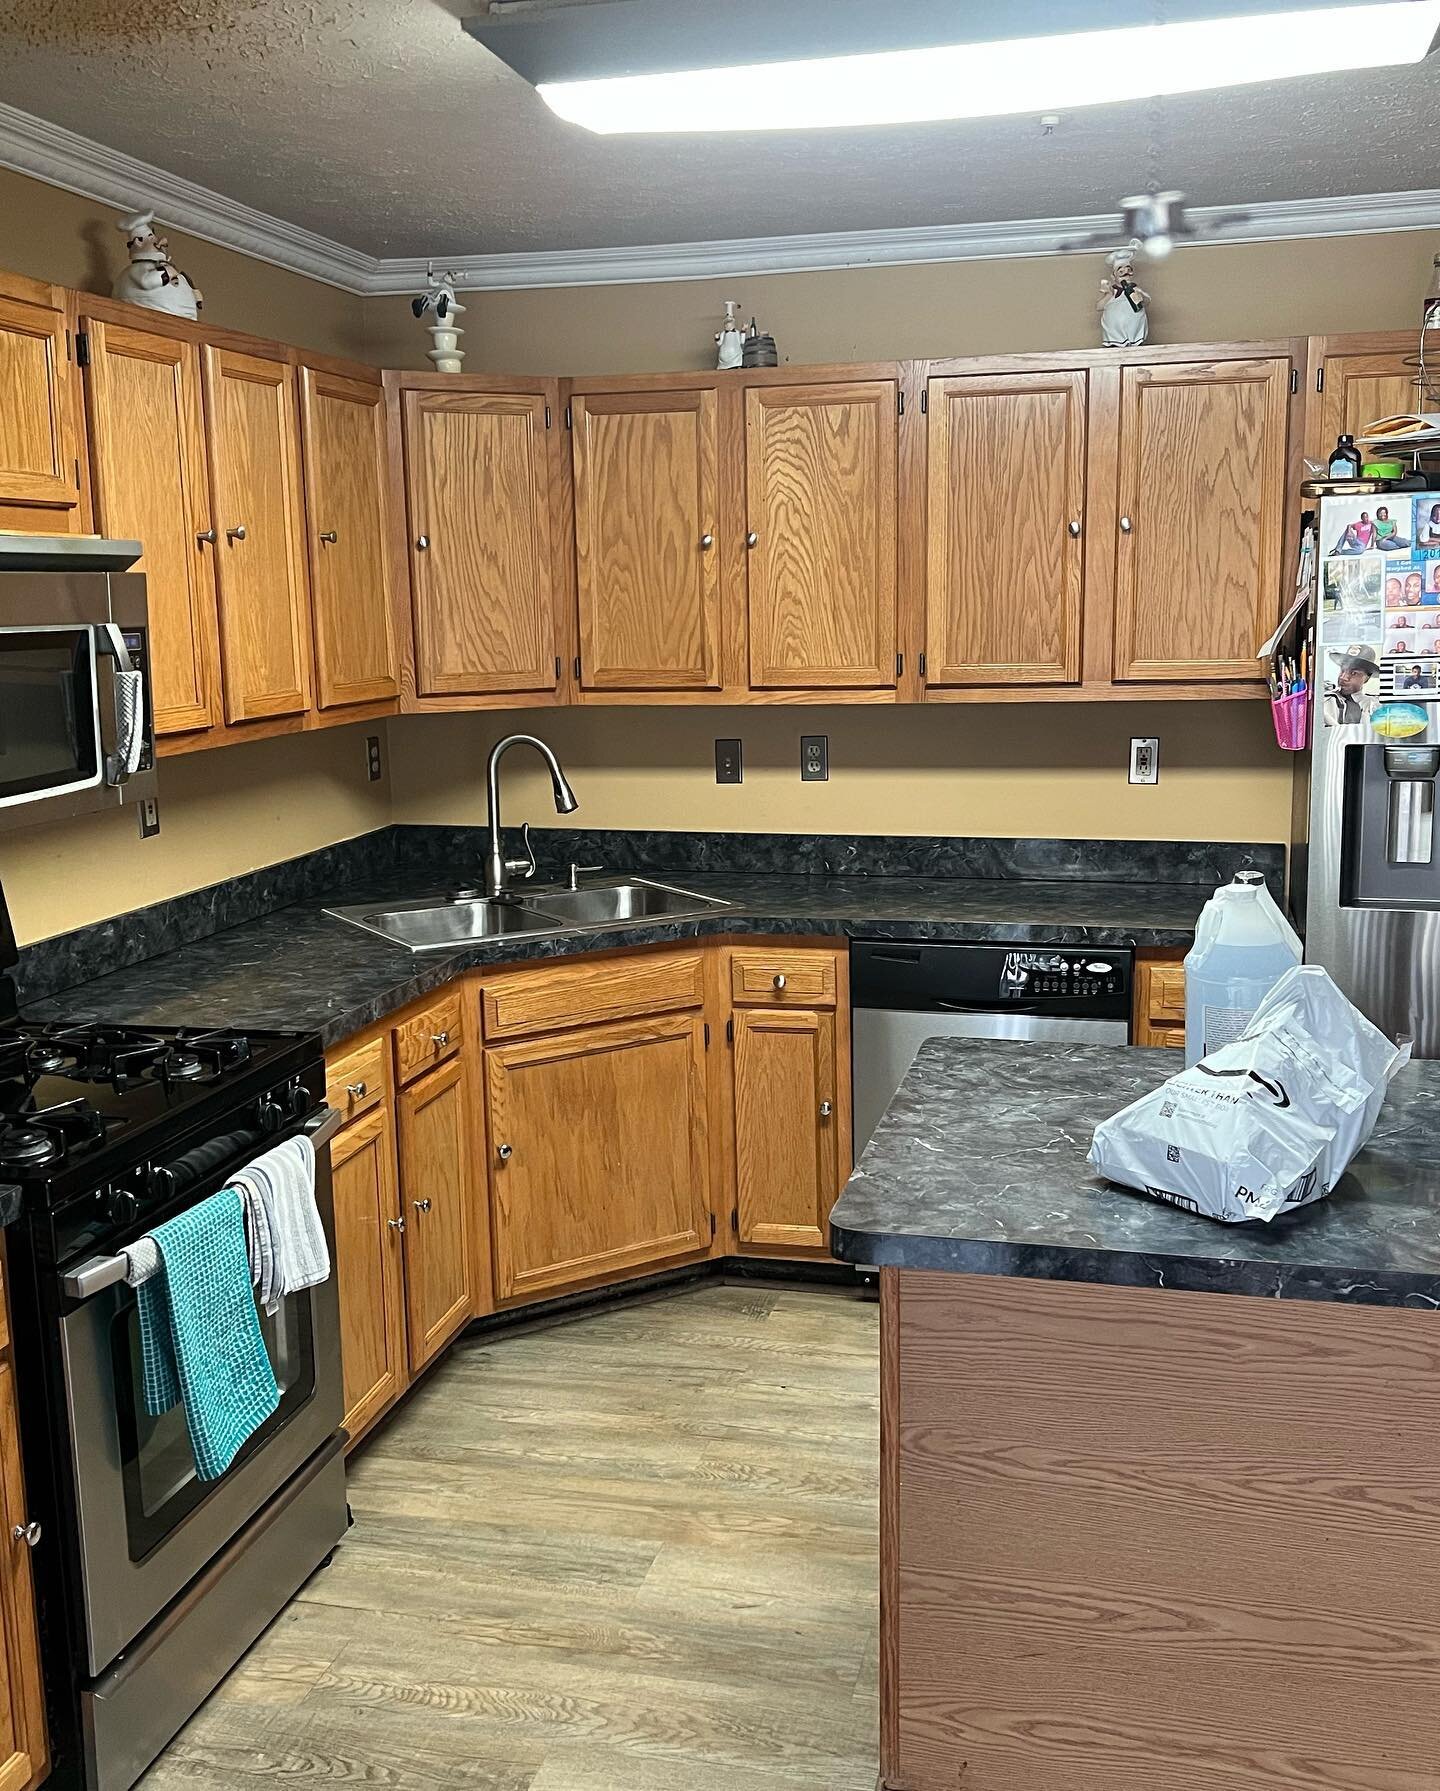 Before and after kitchen transformation (walls painted, cabinets painted, epoxy countertops, tile backsplash installed. Another 
@creative_topcoats. &amp; @true_ellusions_ #epoxyart#lennarhomes#epoxycountertops#homedecor#ryanhomes#fyp#socialmediamark